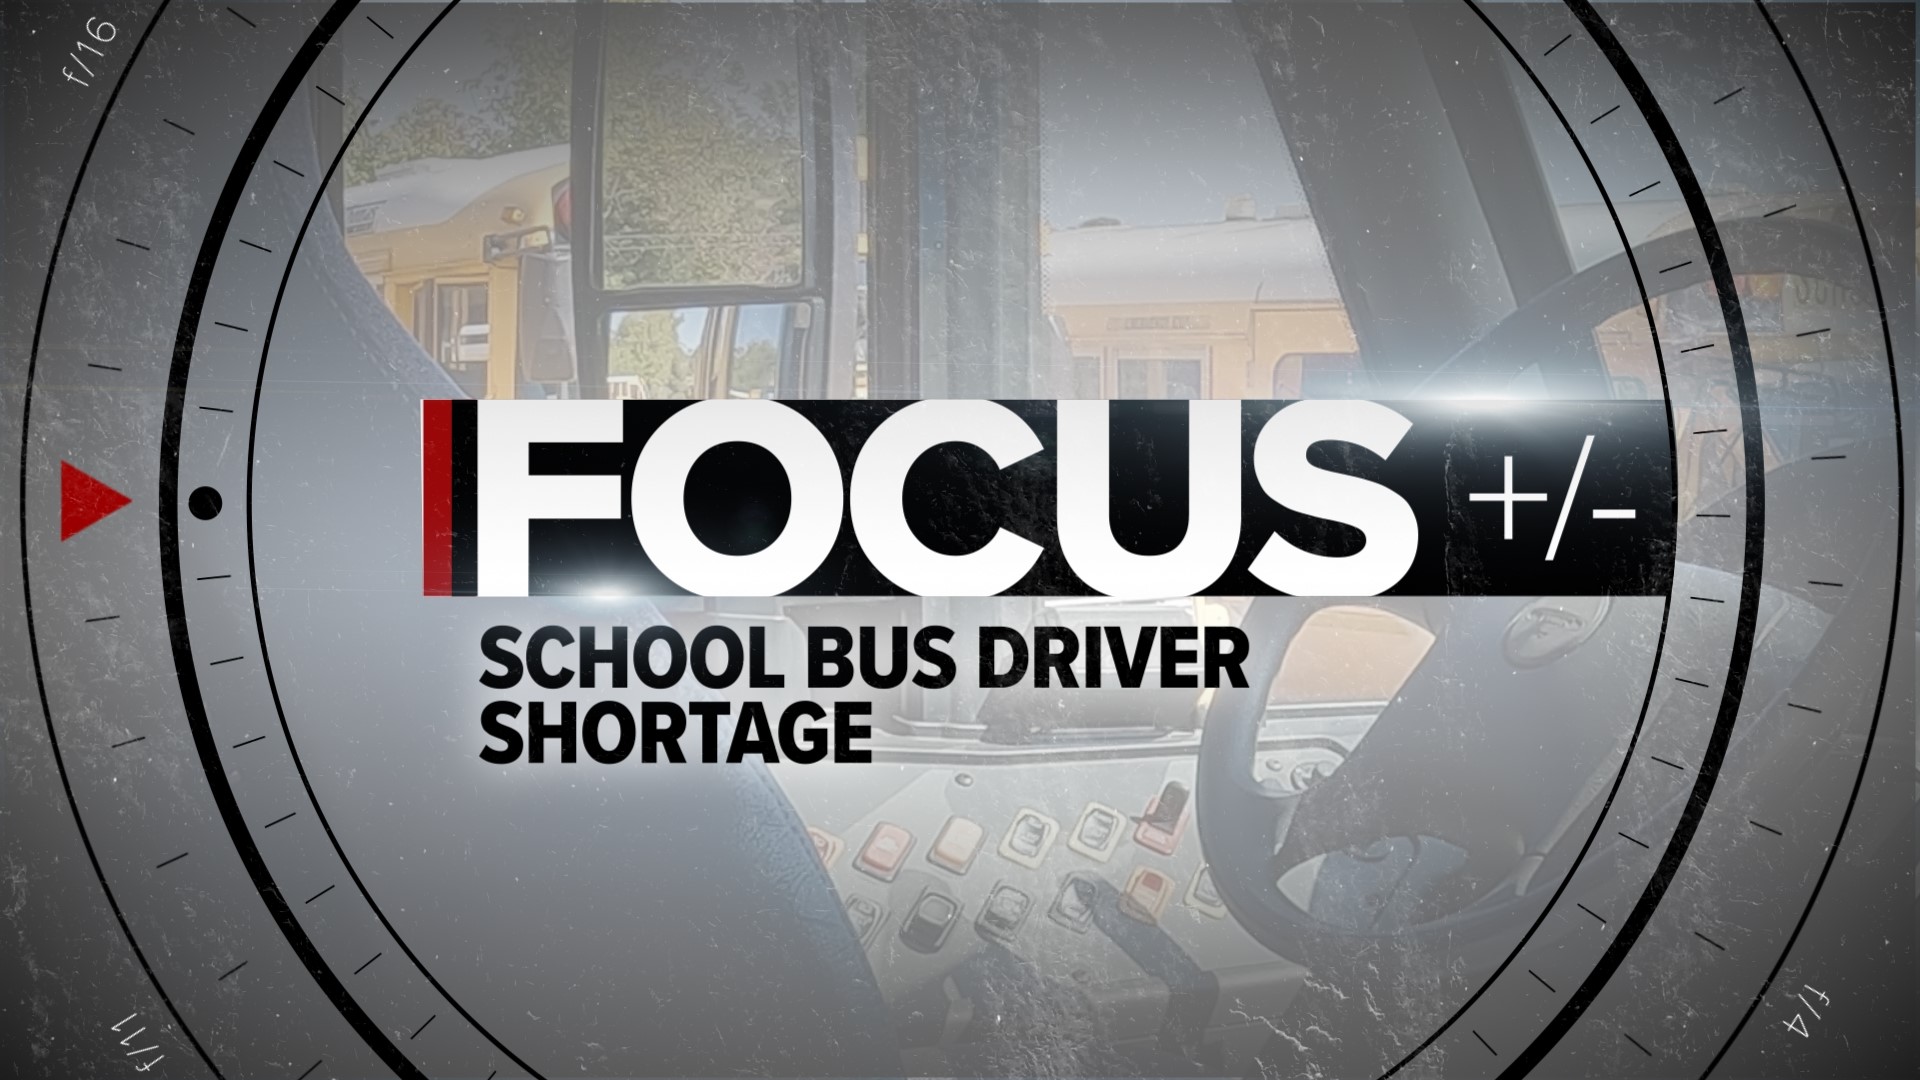 Mike Harned, chief of student services at Breckinridge County Schools, said it’s a complete team effort every day just to get all the routes covered.